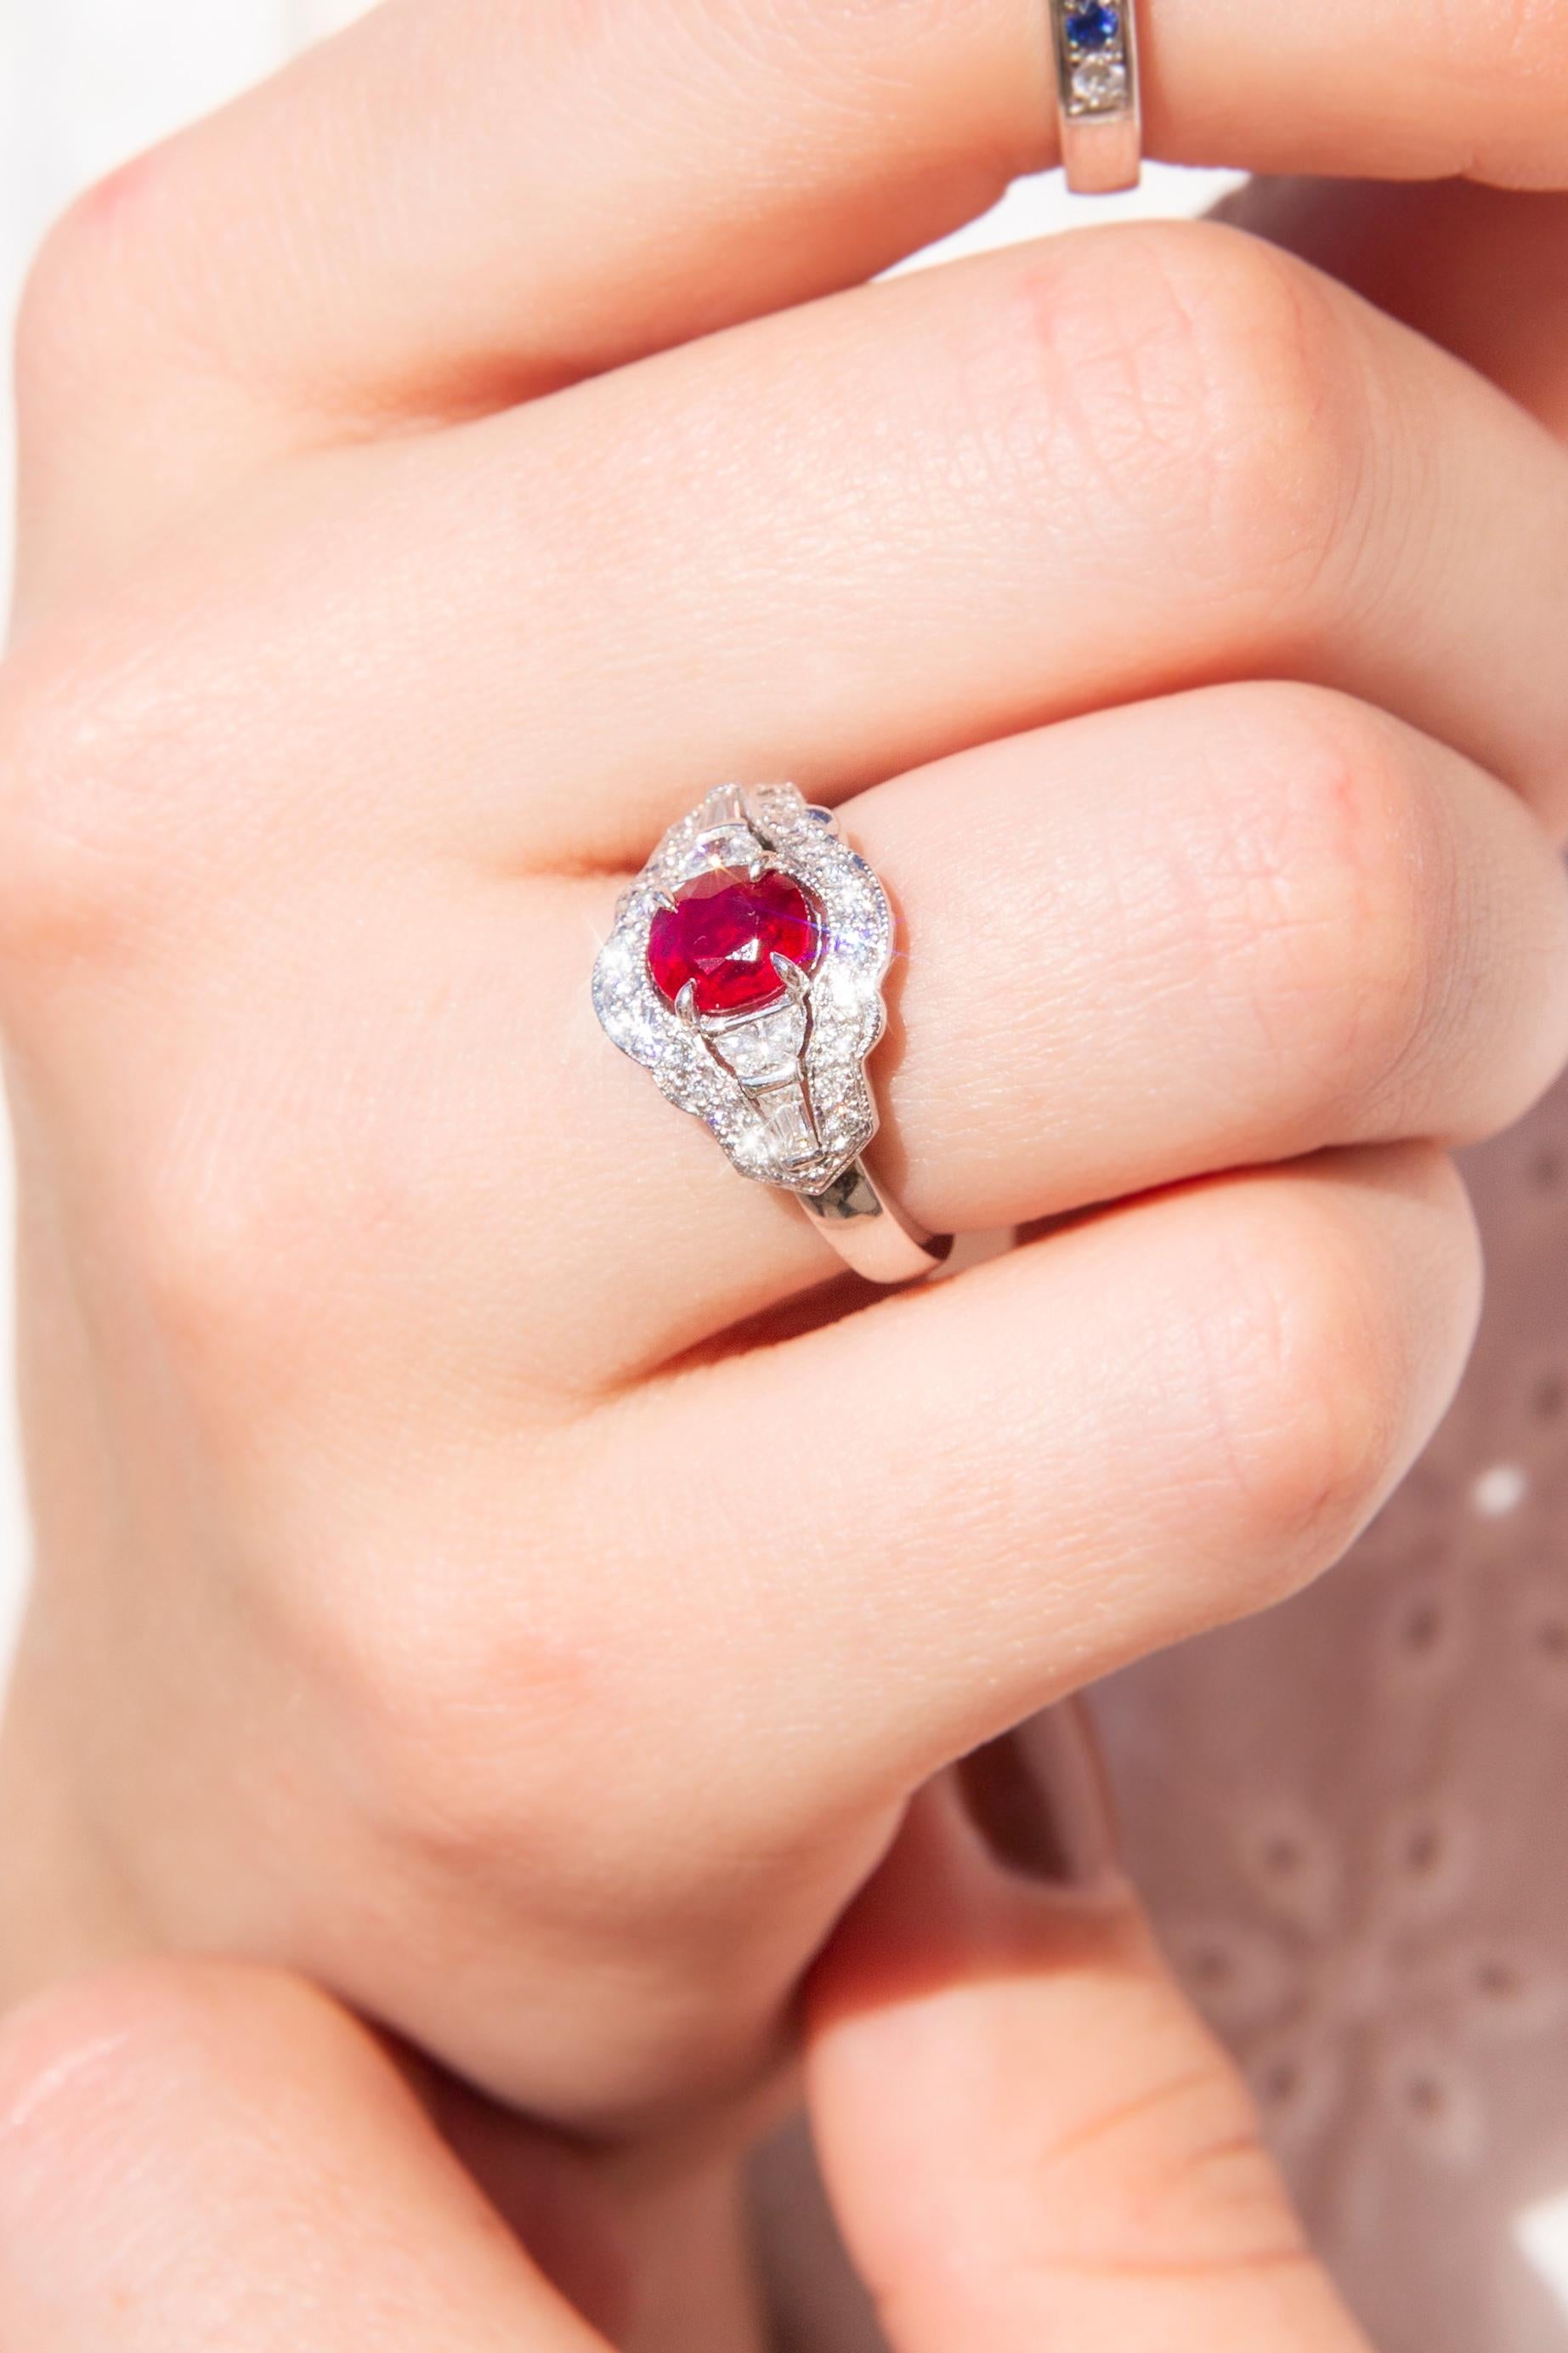 Thoughtfully handcrafted in gleaming 18 carat white gold, this fabulous contemporary cluster ring is absolutely exquisite. The high polish band holds a stunning gallery with a vibrant oval red ruby in an elegant four-claw setting. The ruby is